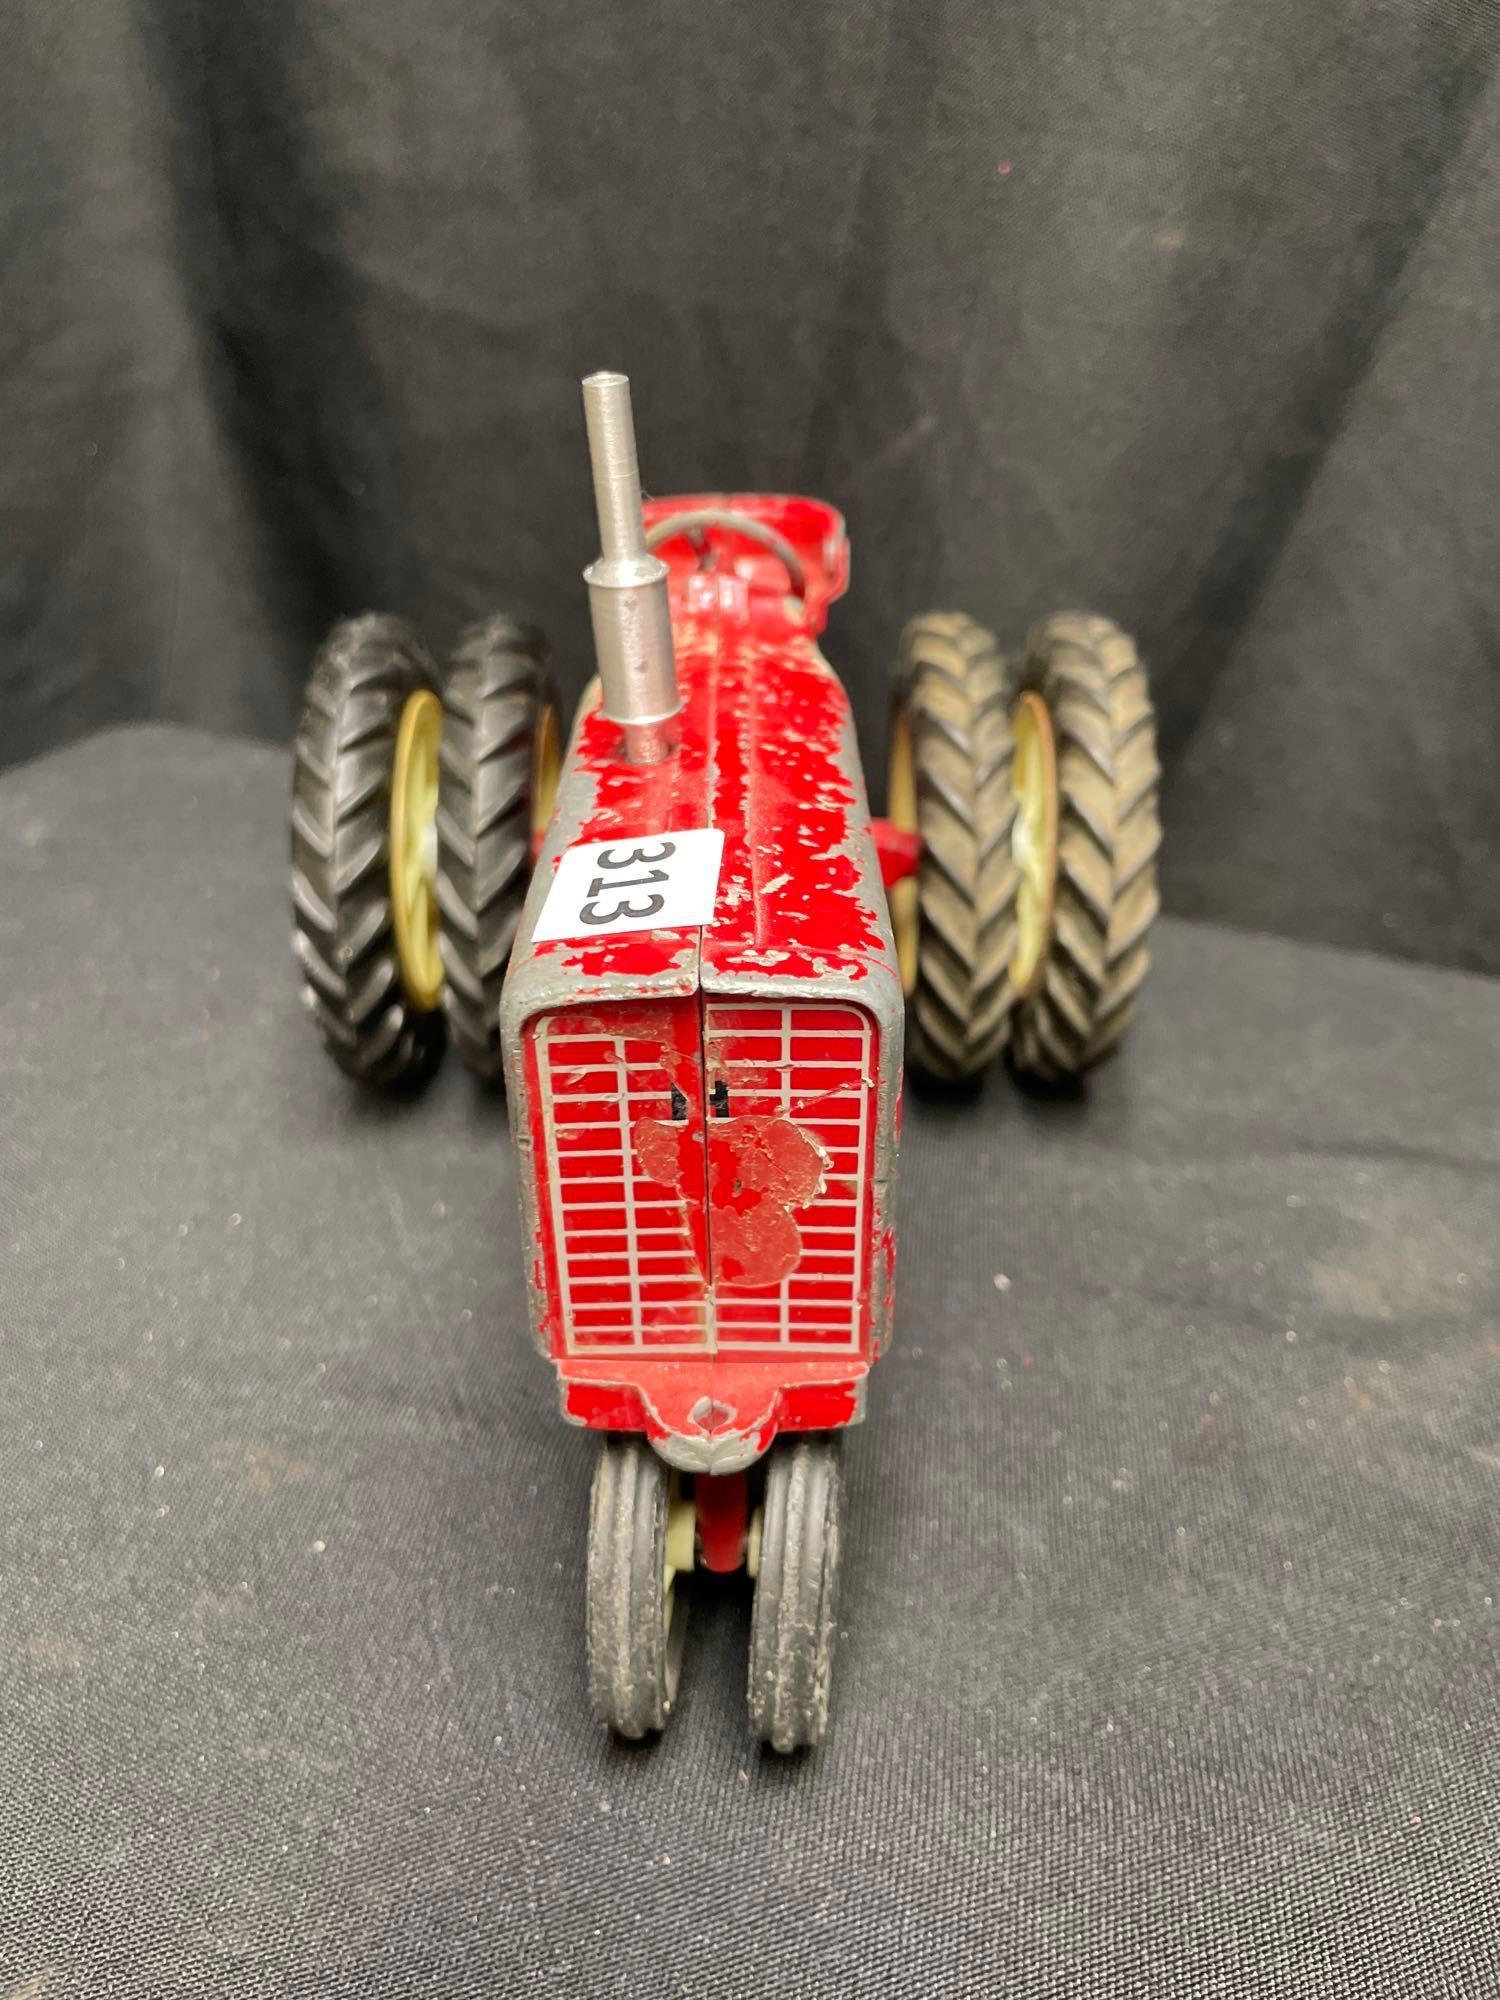 1/16th Scale Ertl IH Tractor w/nf and duals